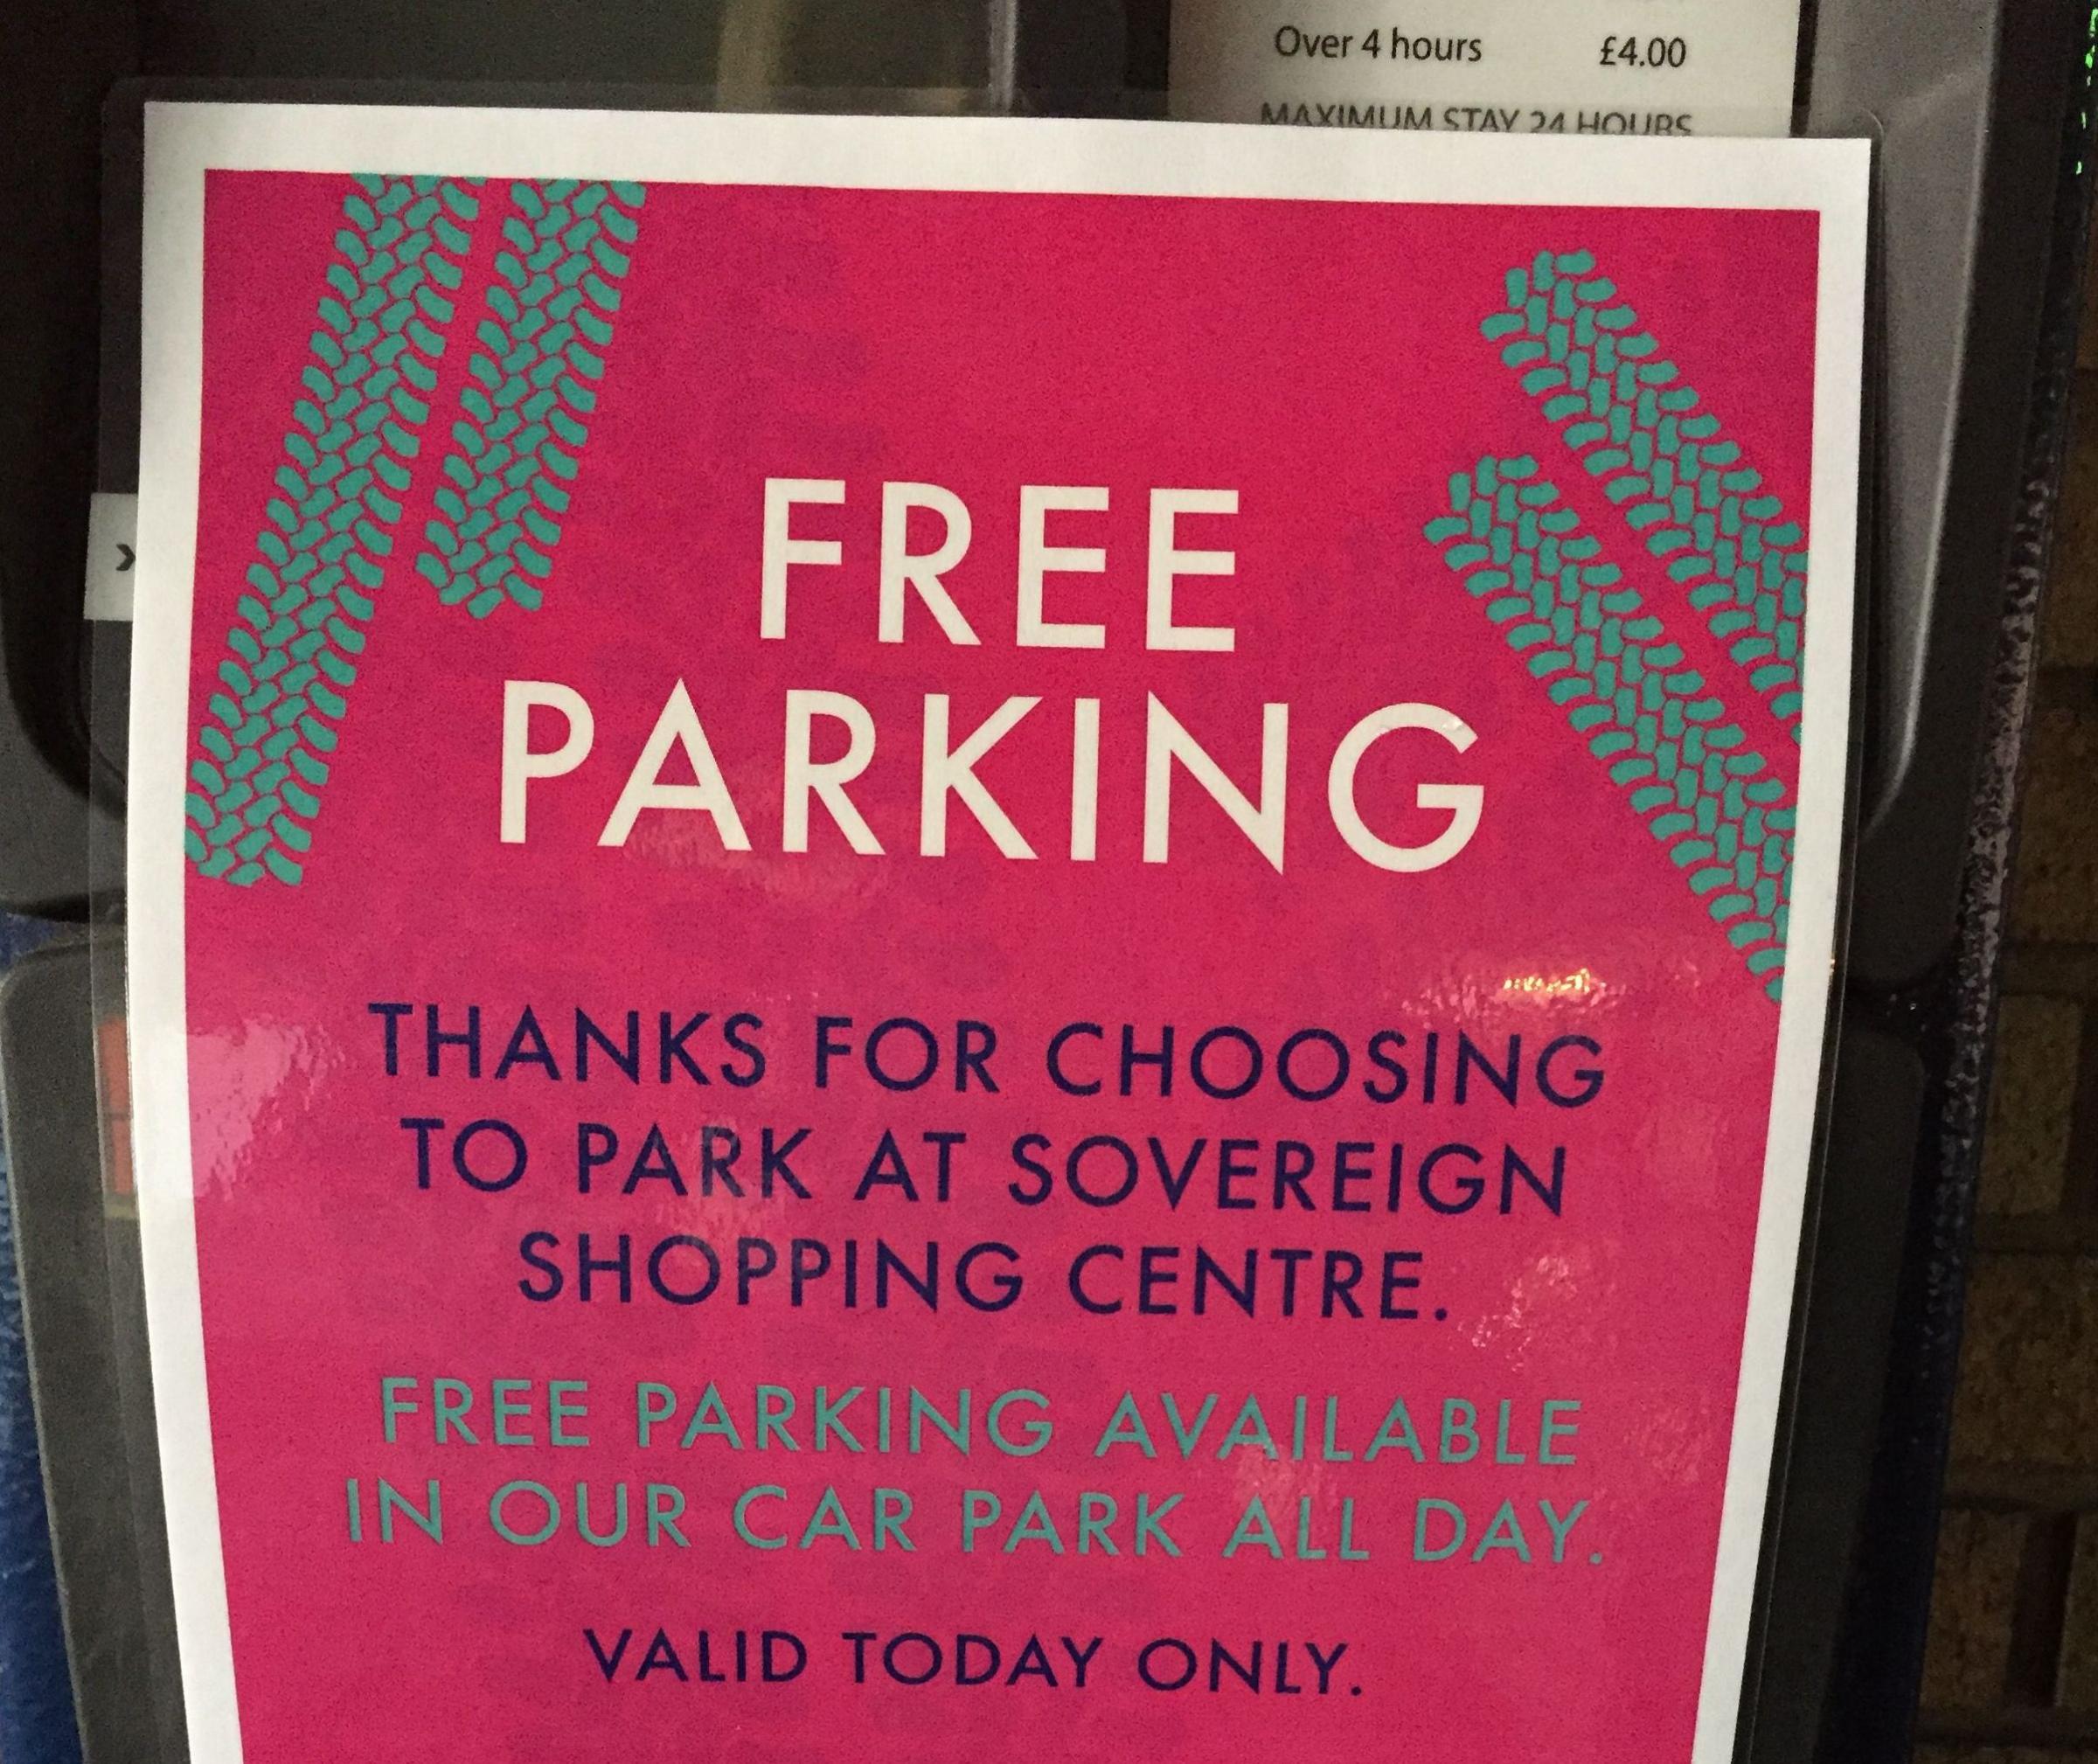 Free parking for all (but only because the machines have been broken into)